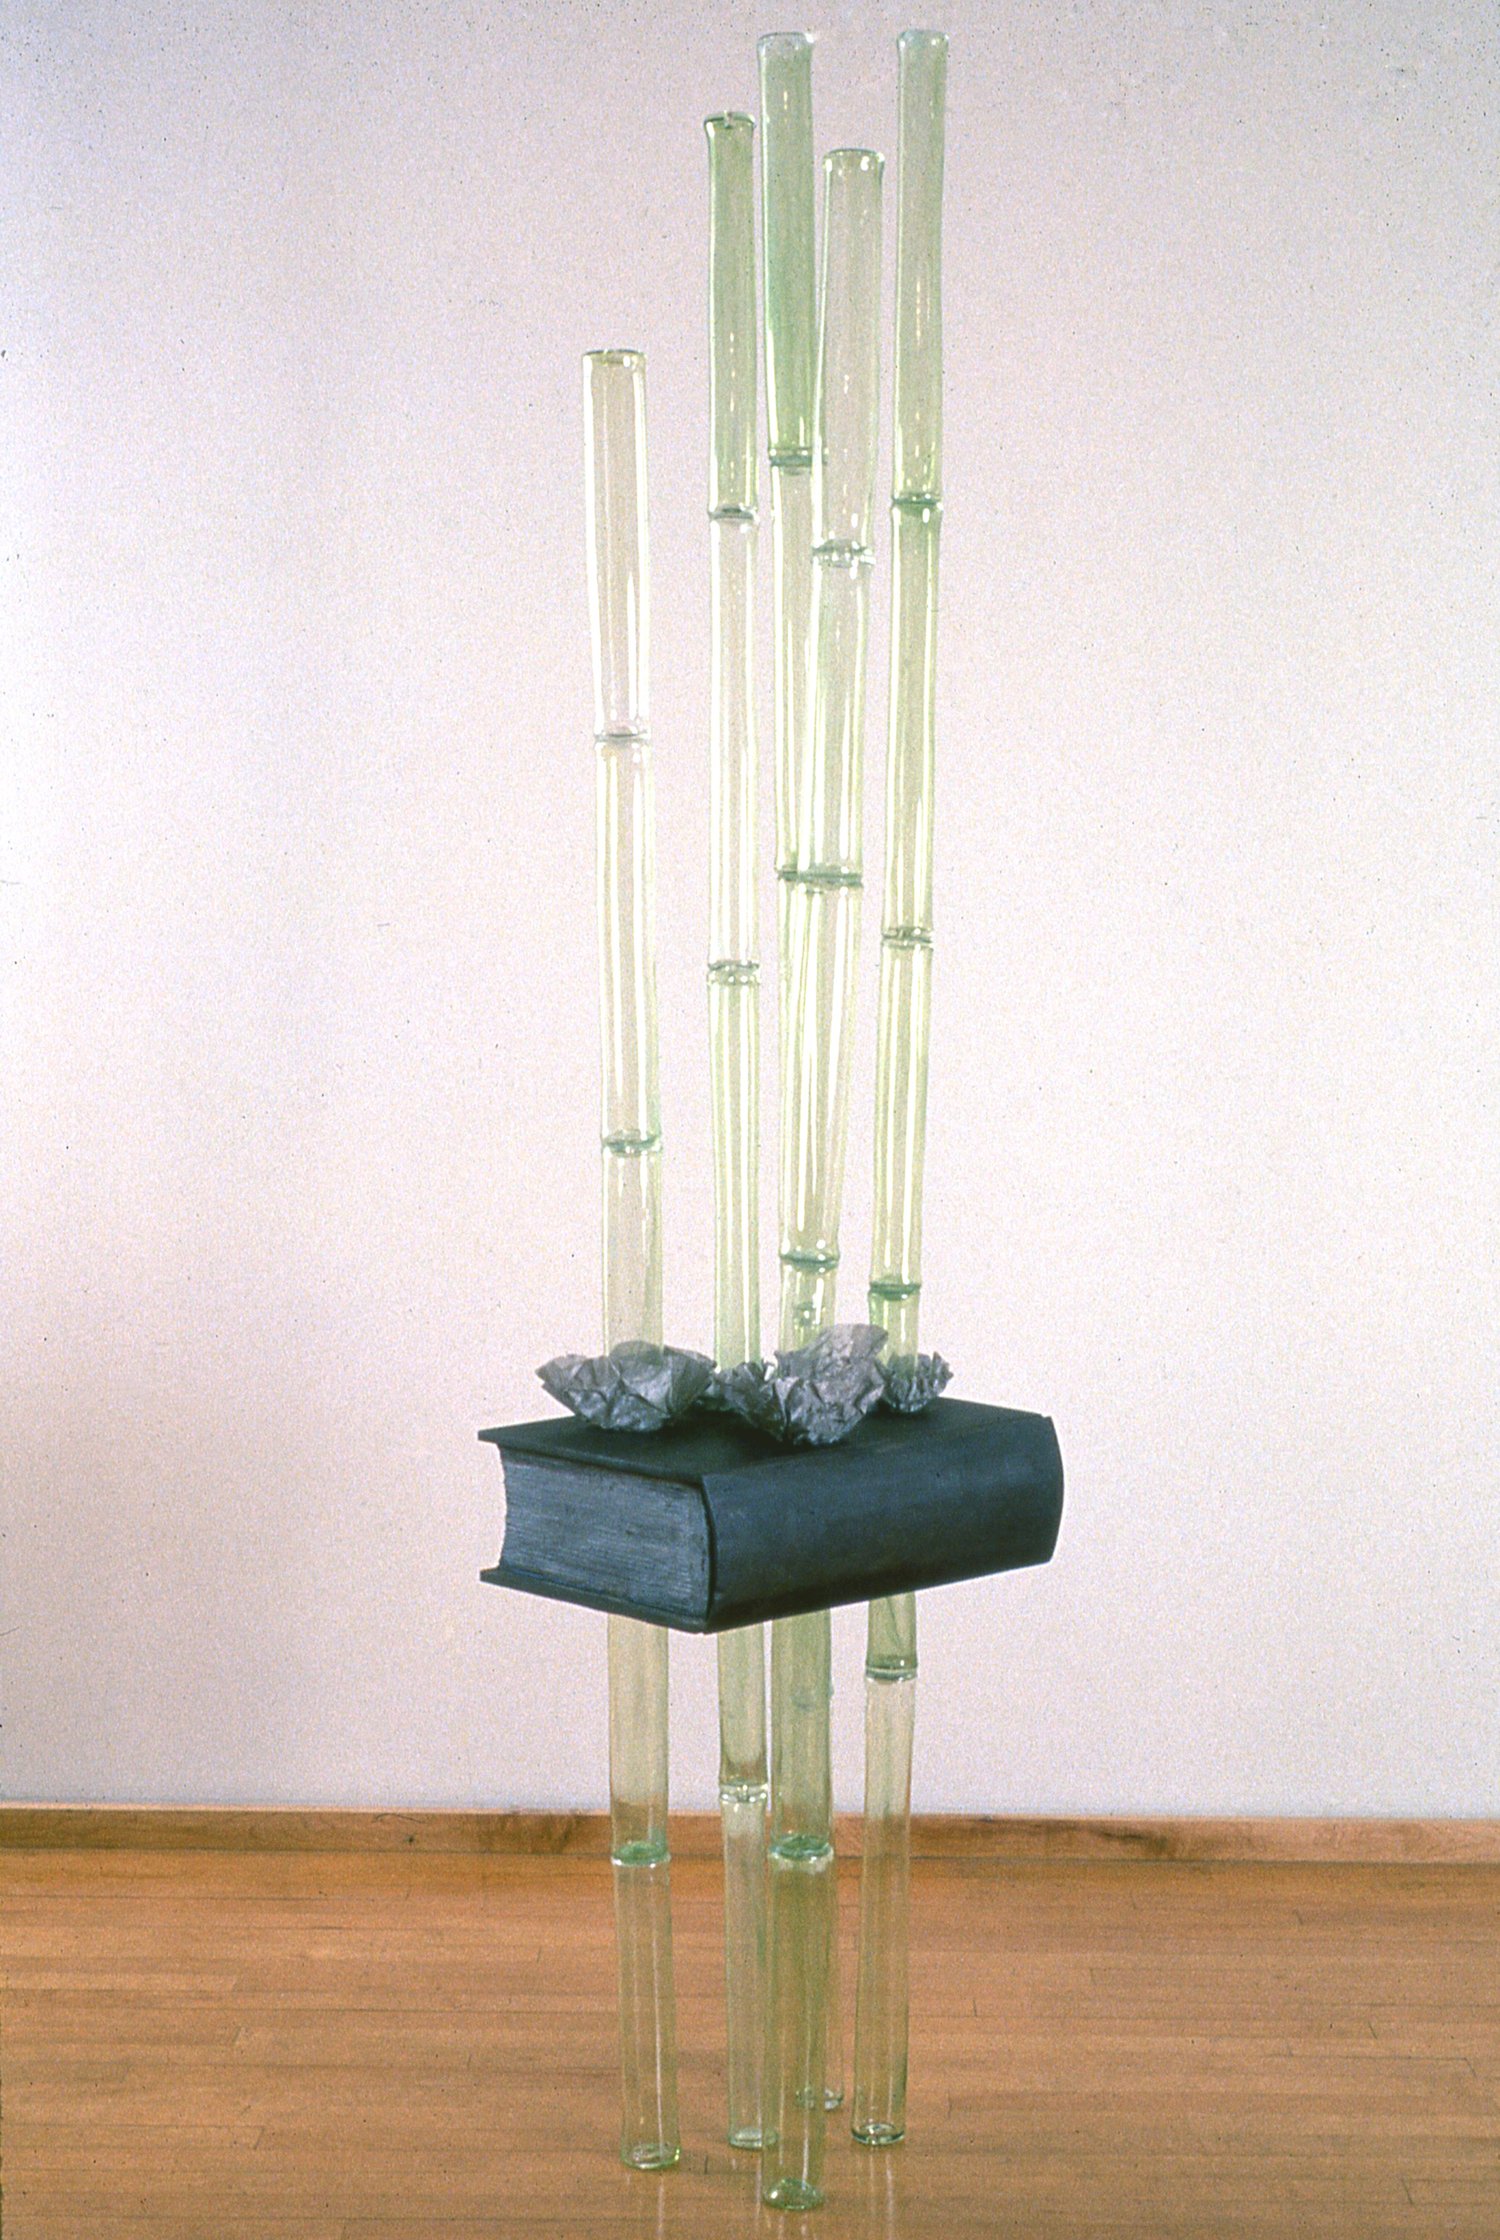  GROVE (1995), glass, wood, graphite, freestanding sculpture: 56 inches high, 22 inches wide, 26 inches deep 